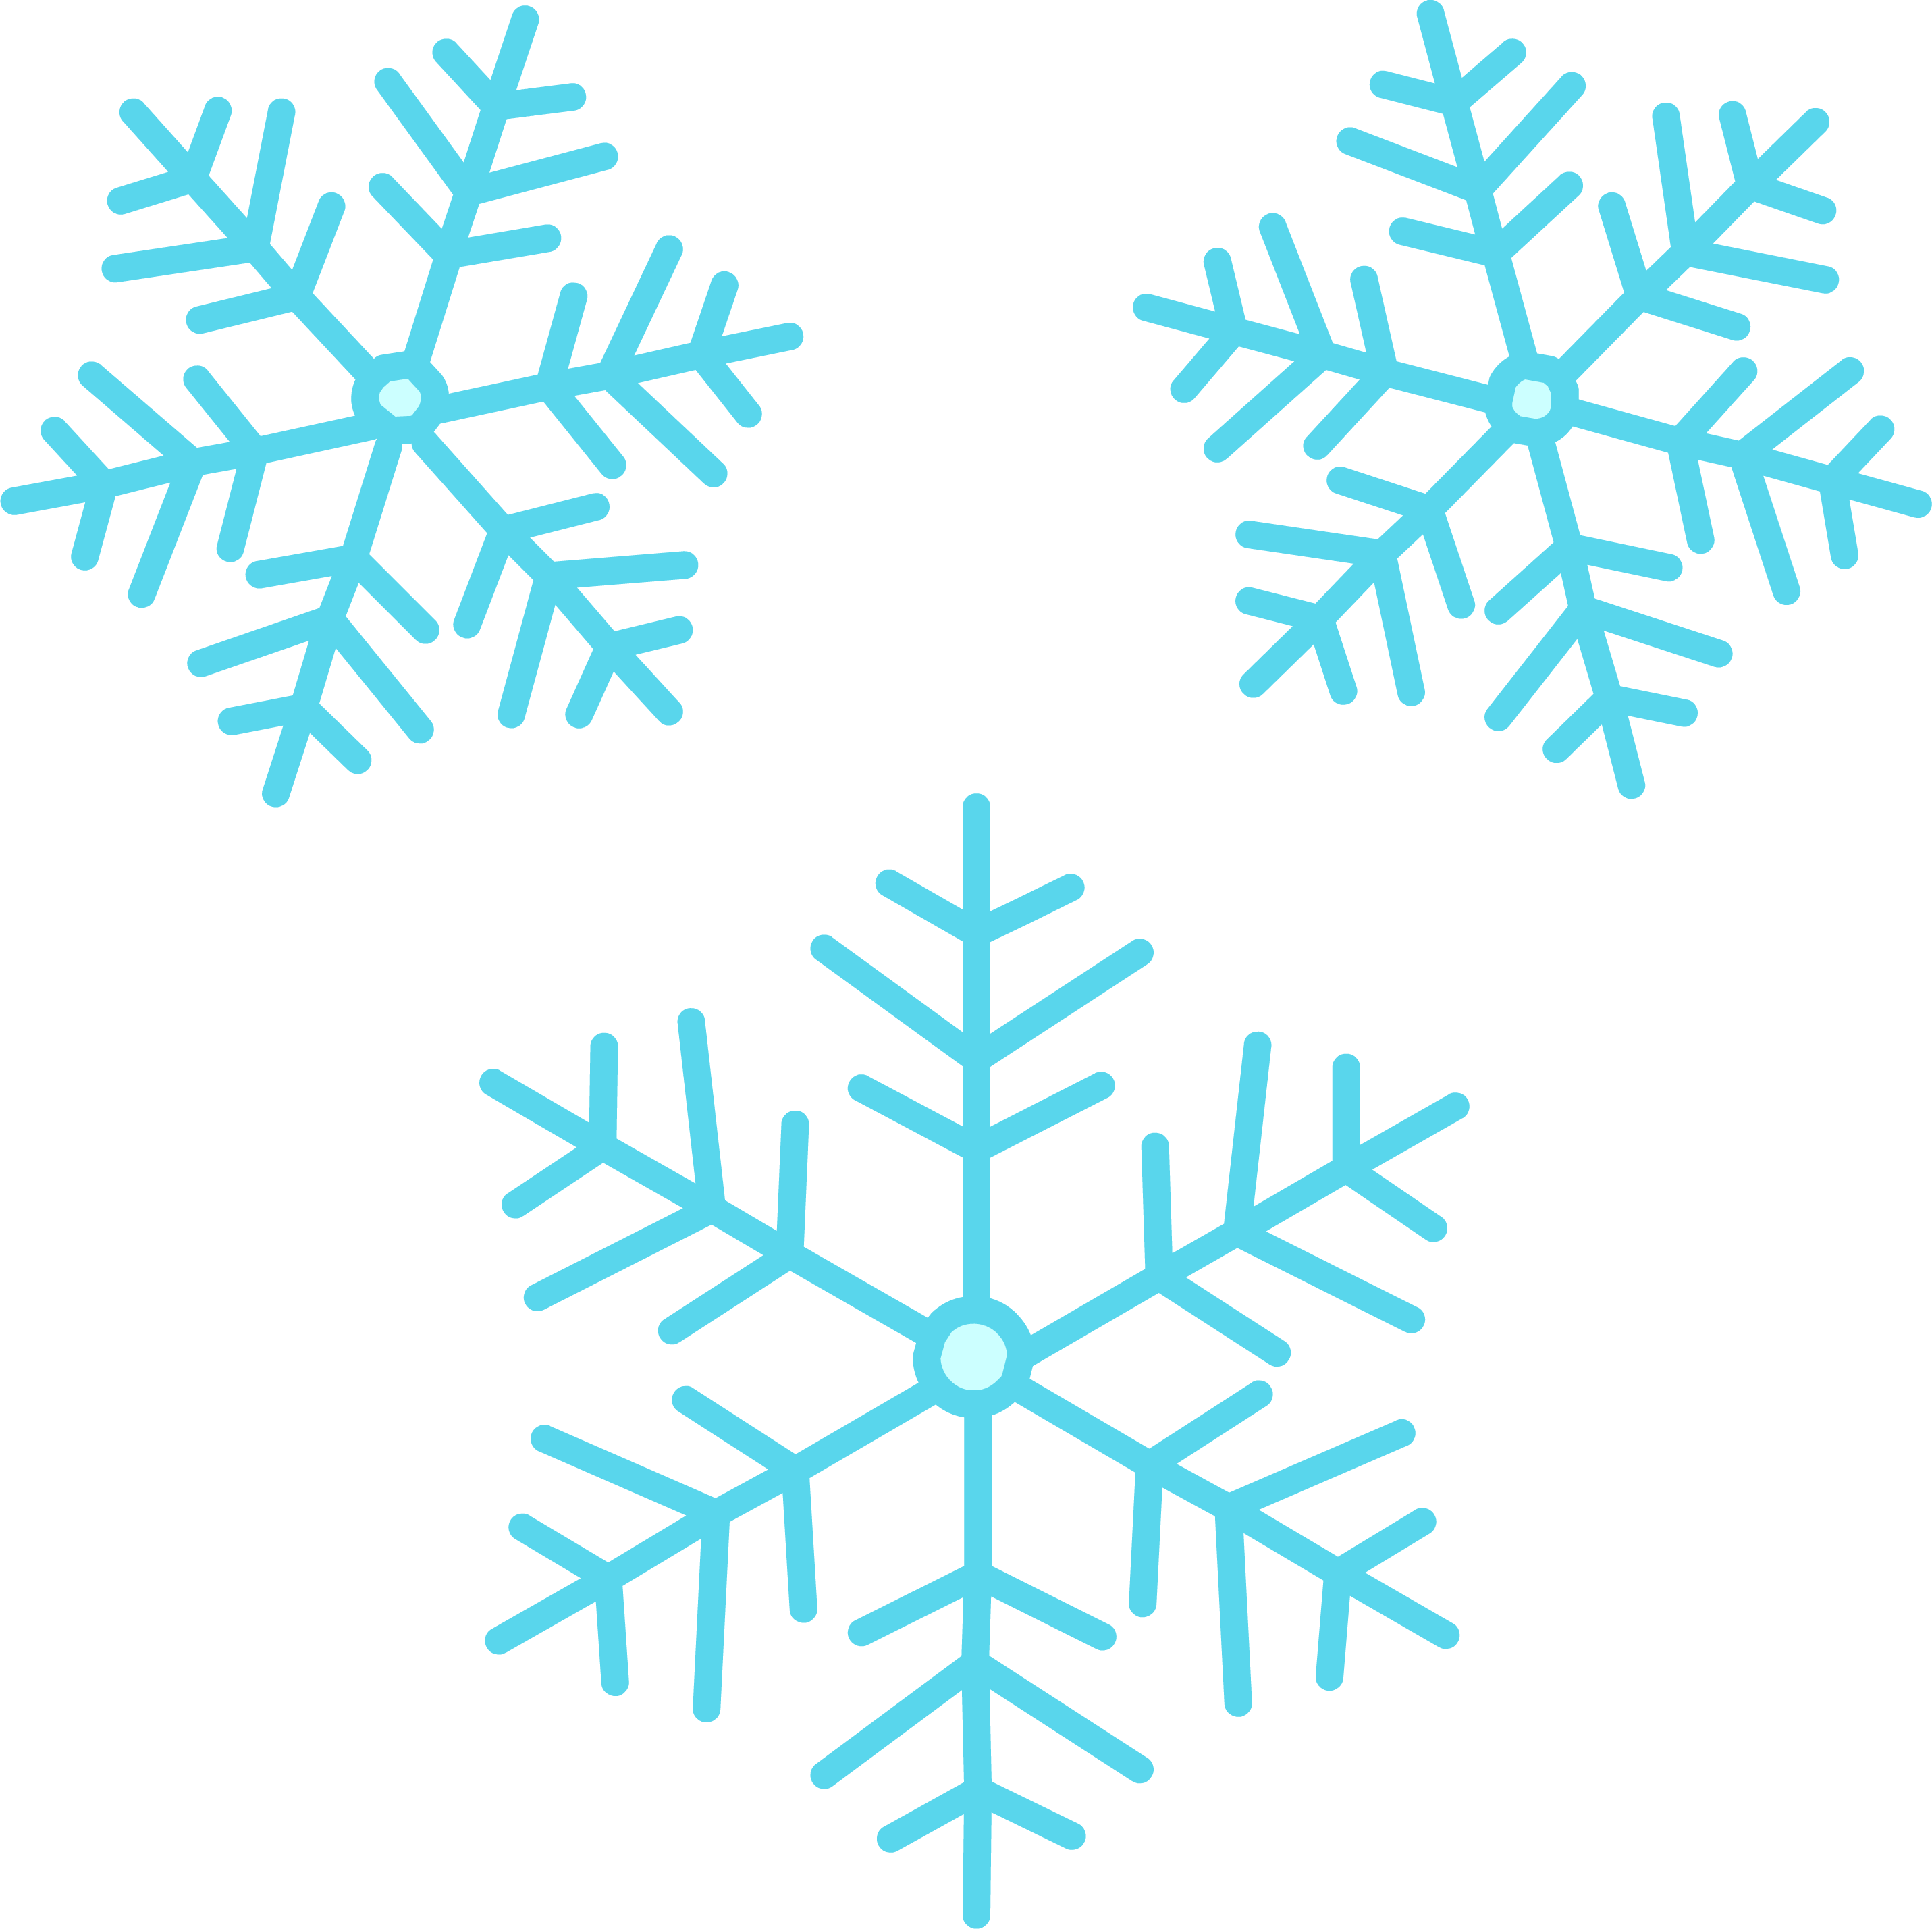 8 Fun Facts About Snowflakes